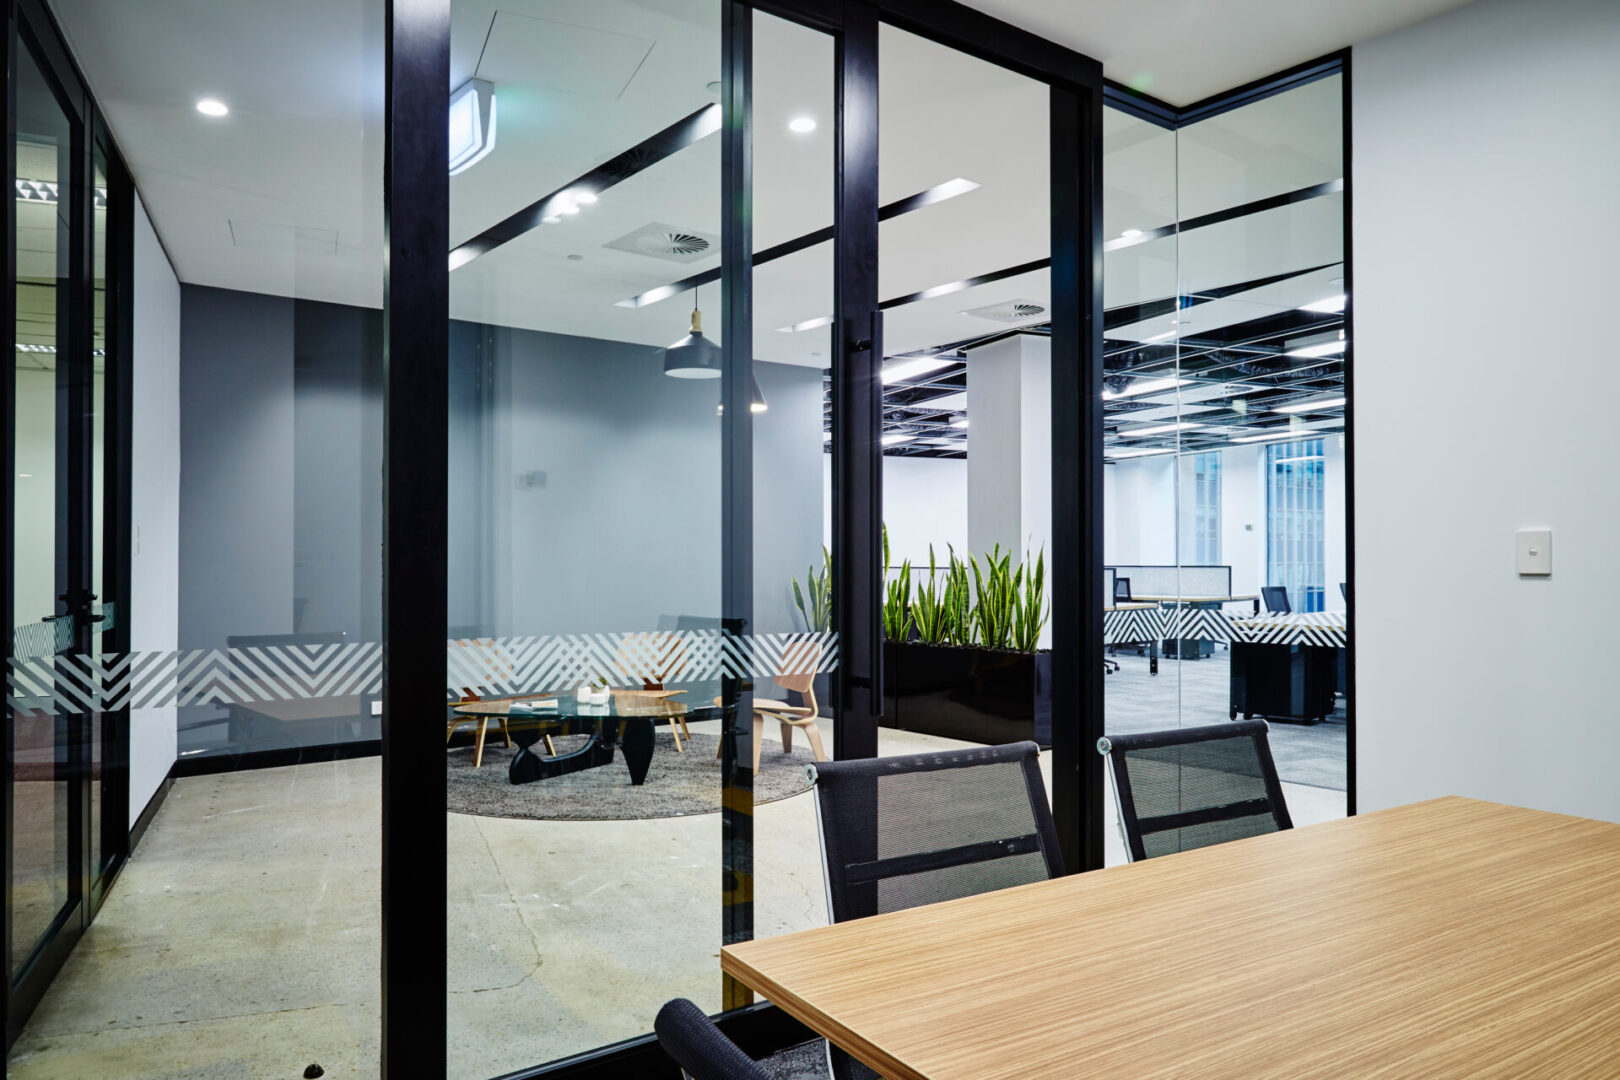 A meeting room with a glass divider